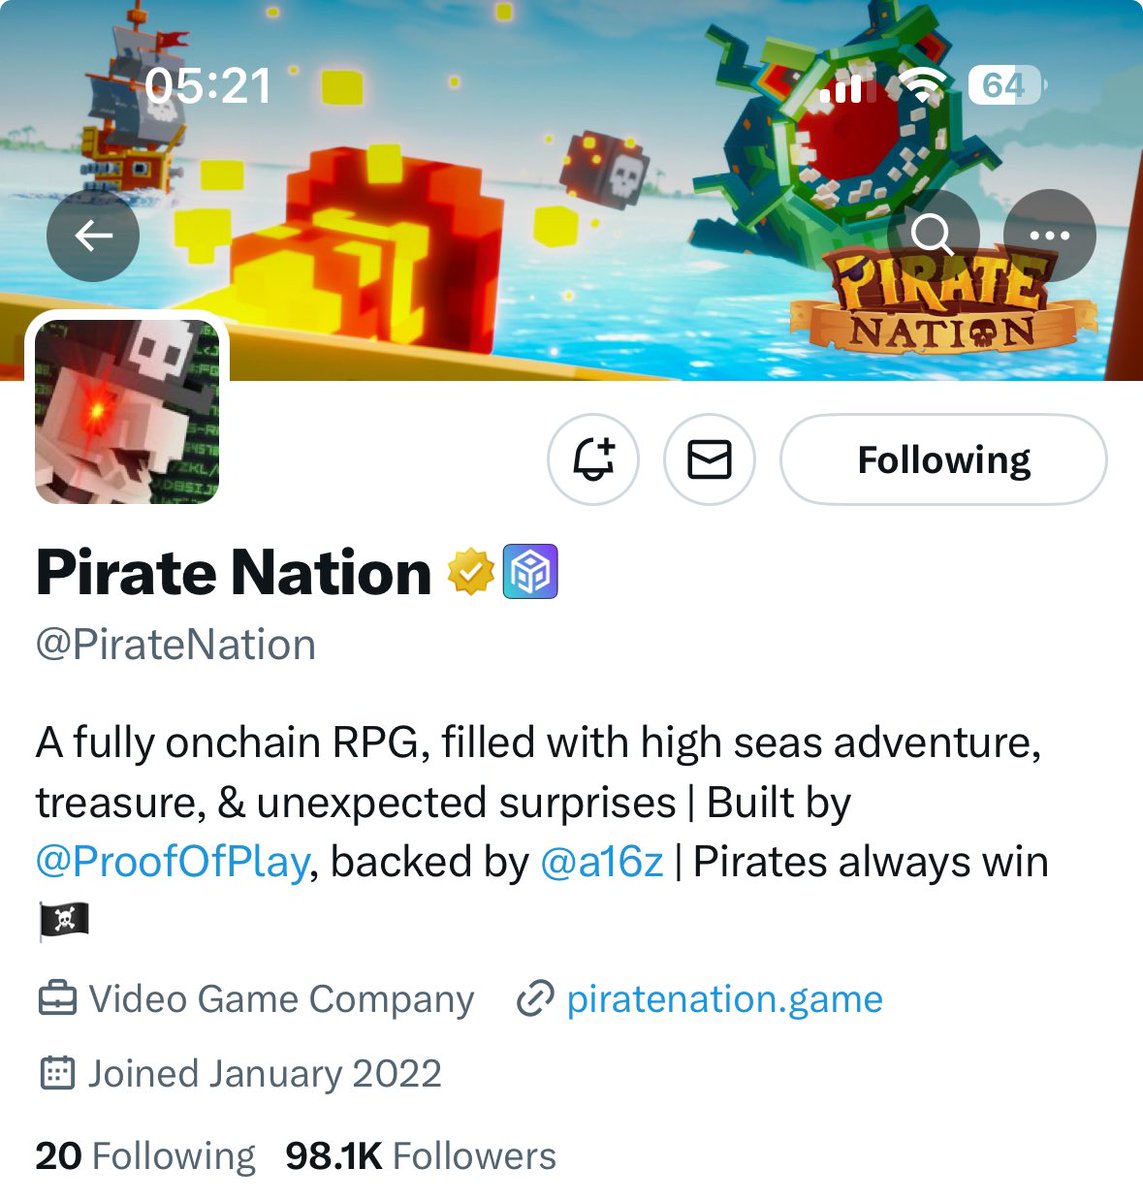 Who wants @PirateNation code?

Code will be dropped in my telegram channel shortly 

t.me/Shrmurdafam